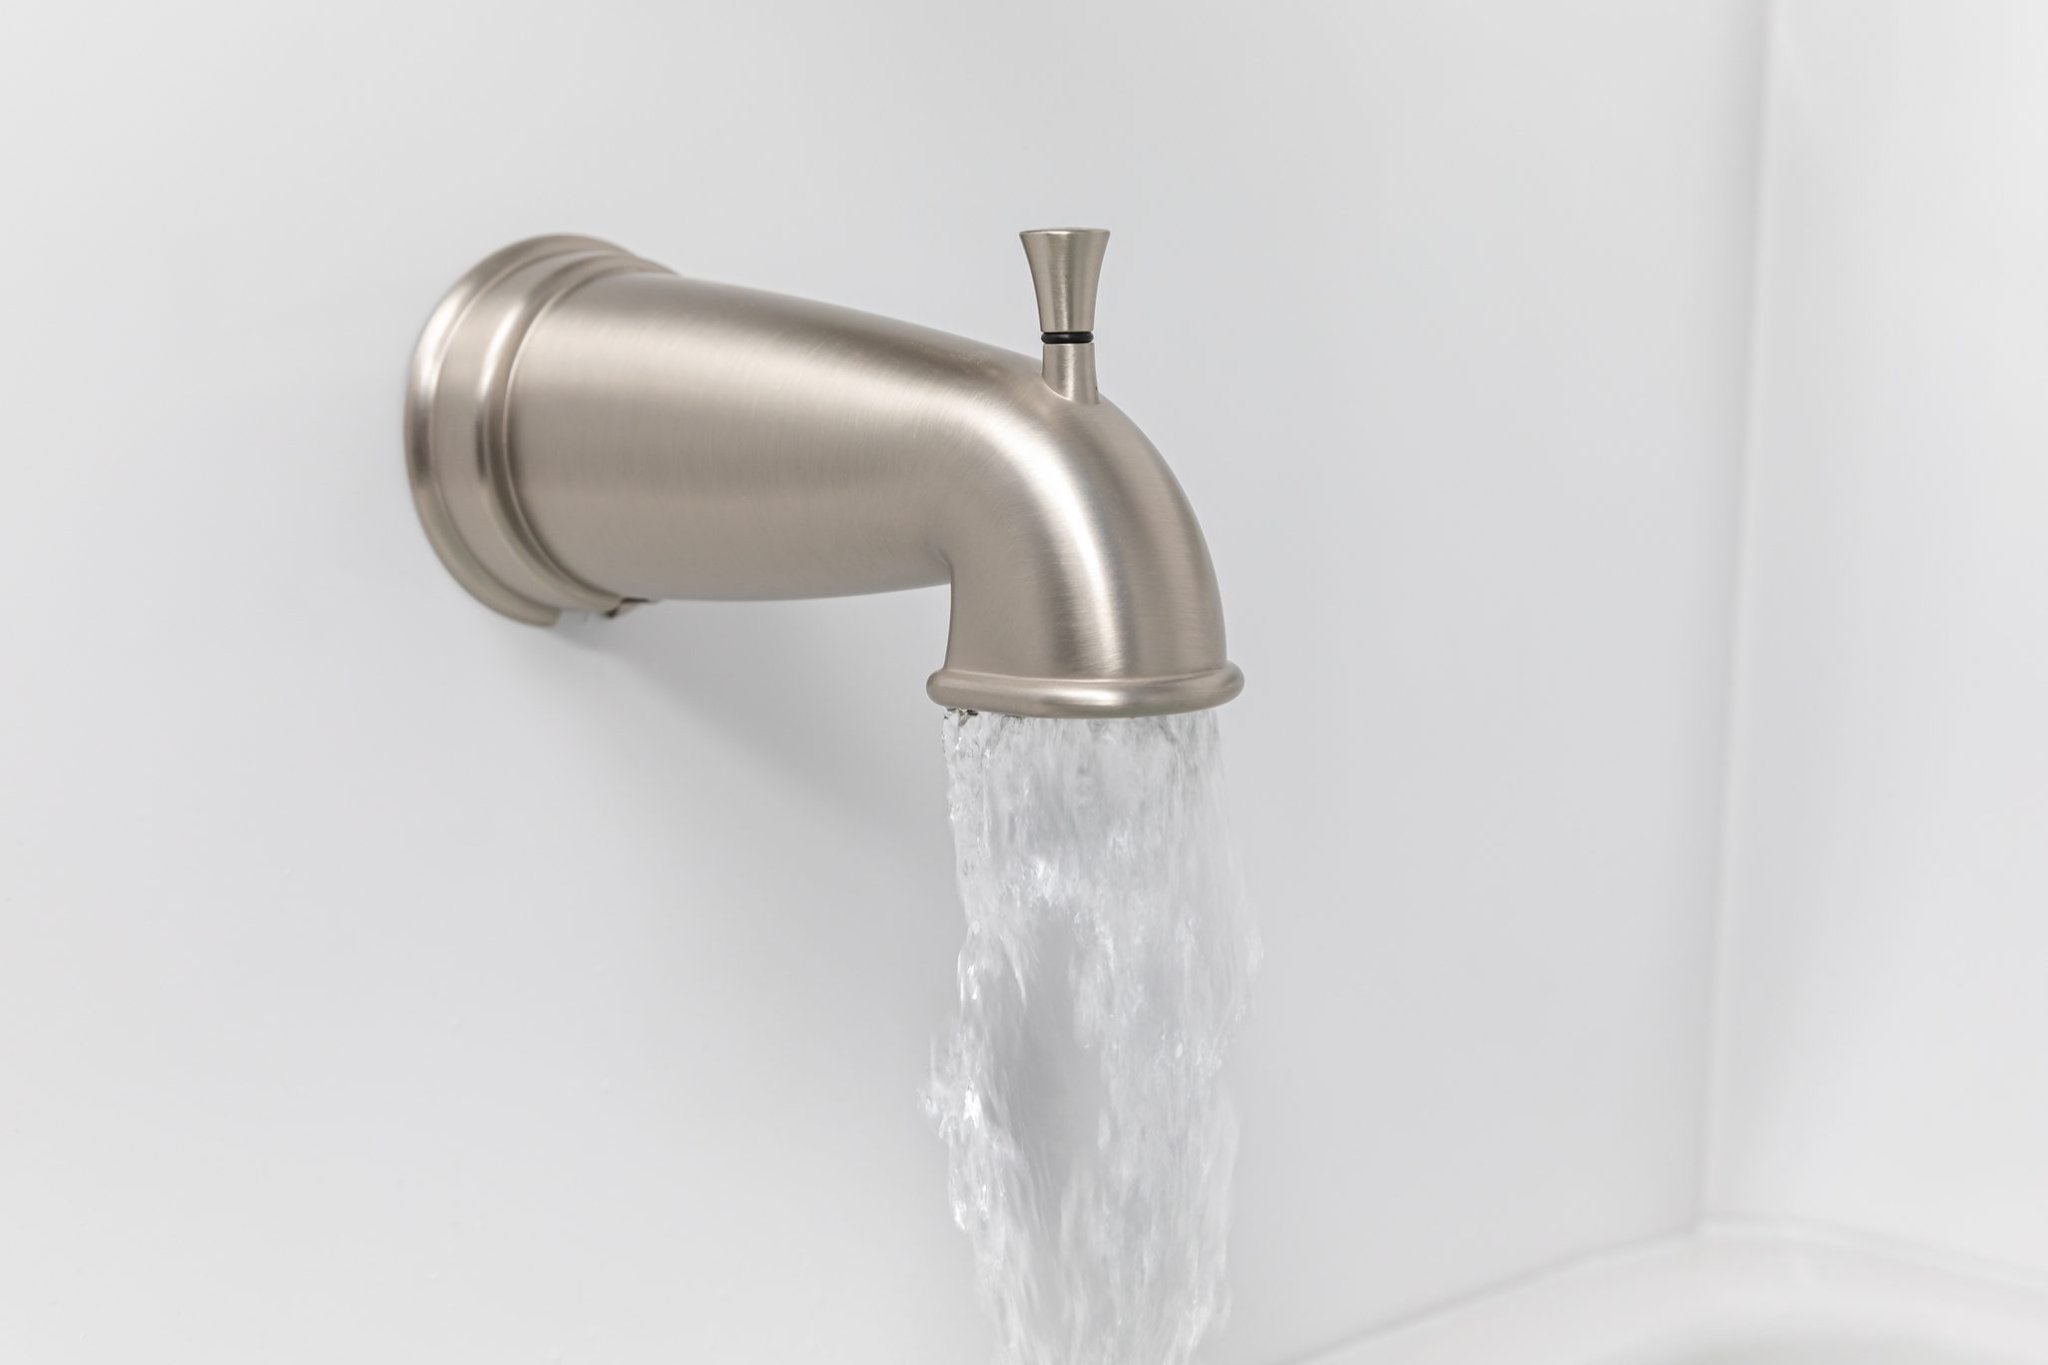 8 Ways Conserving Hot Water Can Reduce High Utility Bills